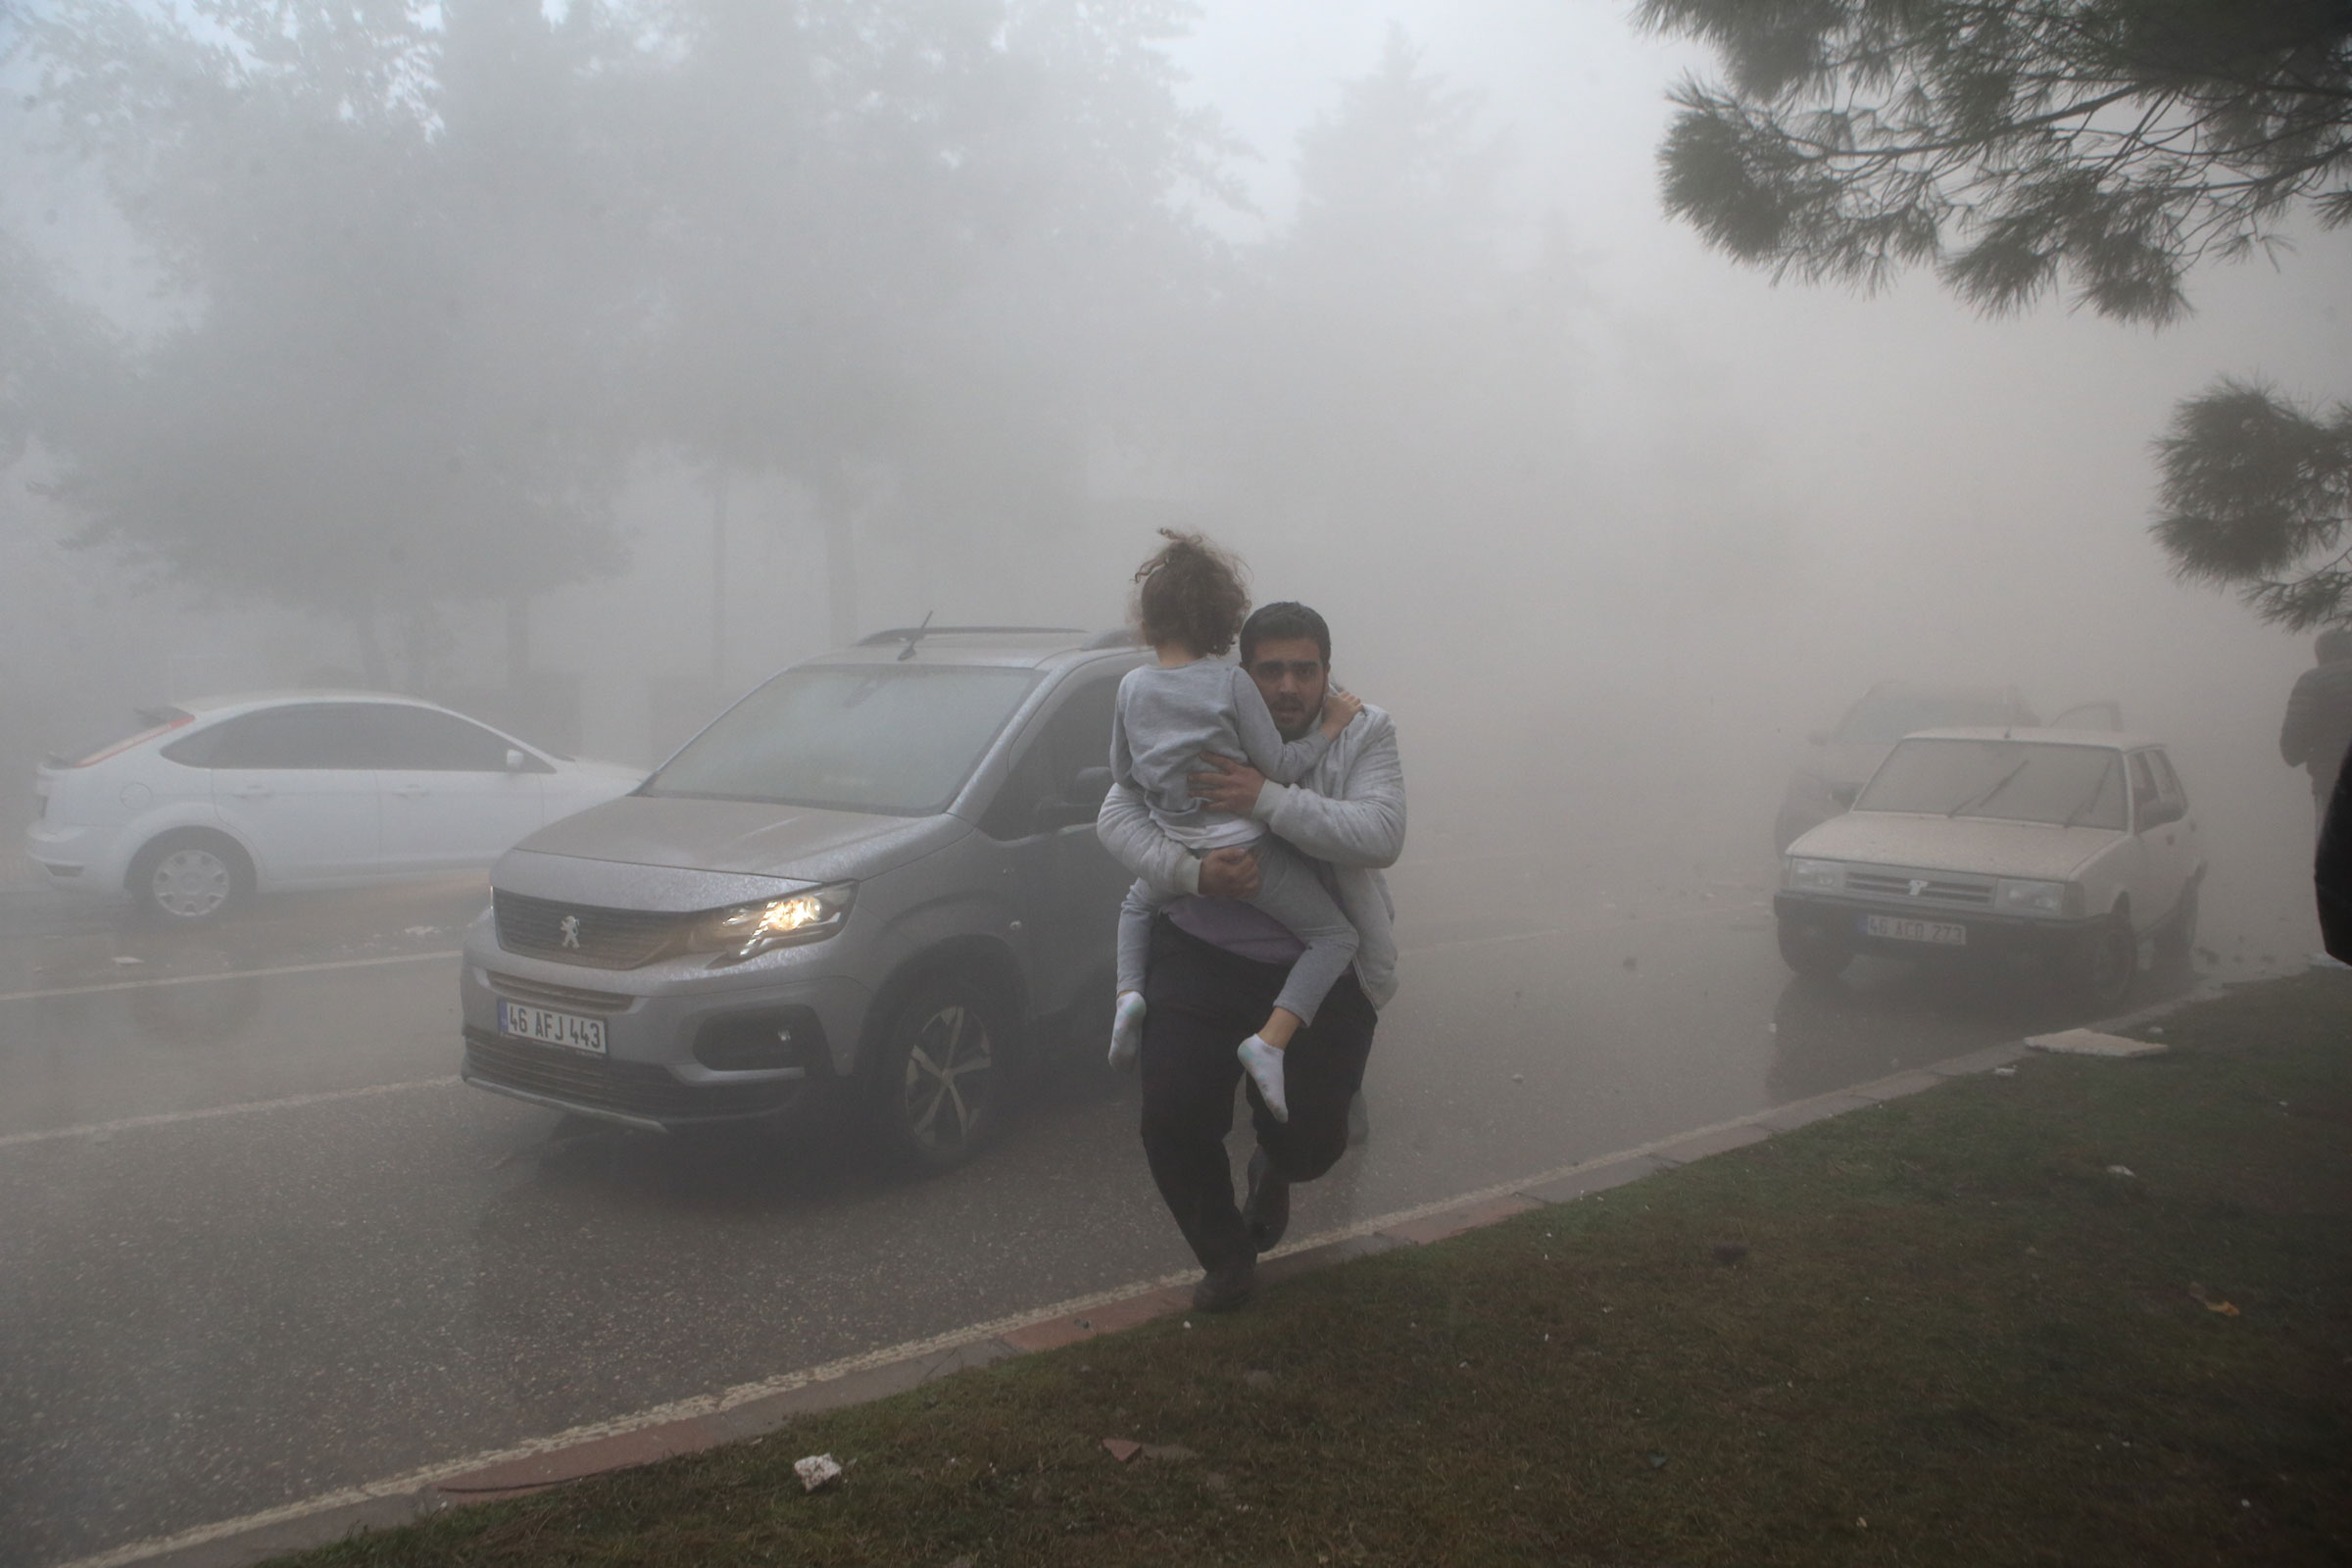 People are seen among the dust cloud formed after a building collapsed in the aftershock in Kahramanmaras. (Kemal Ceylan—Anadolu Agency/Getty Images)